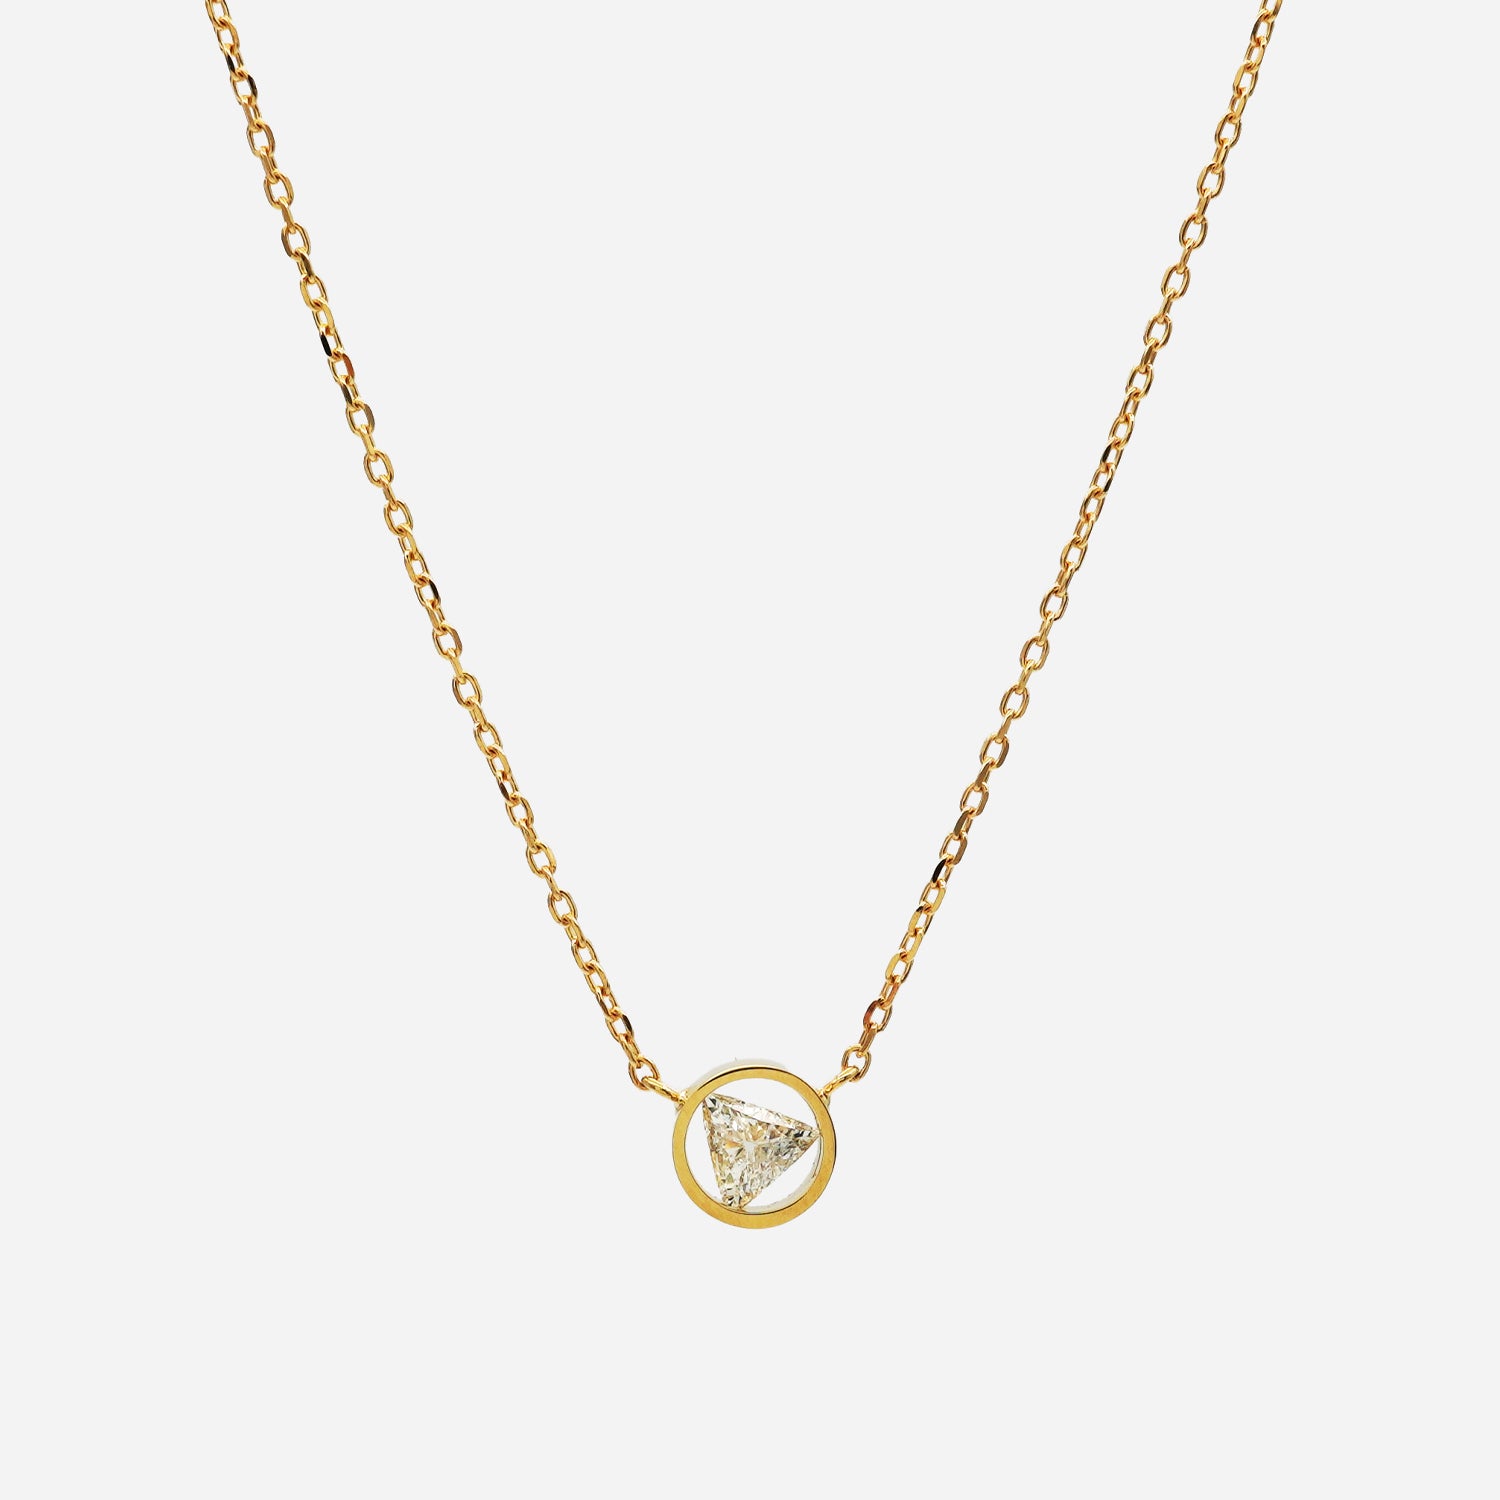 POSITION NECKLACE 0.09ct #2647